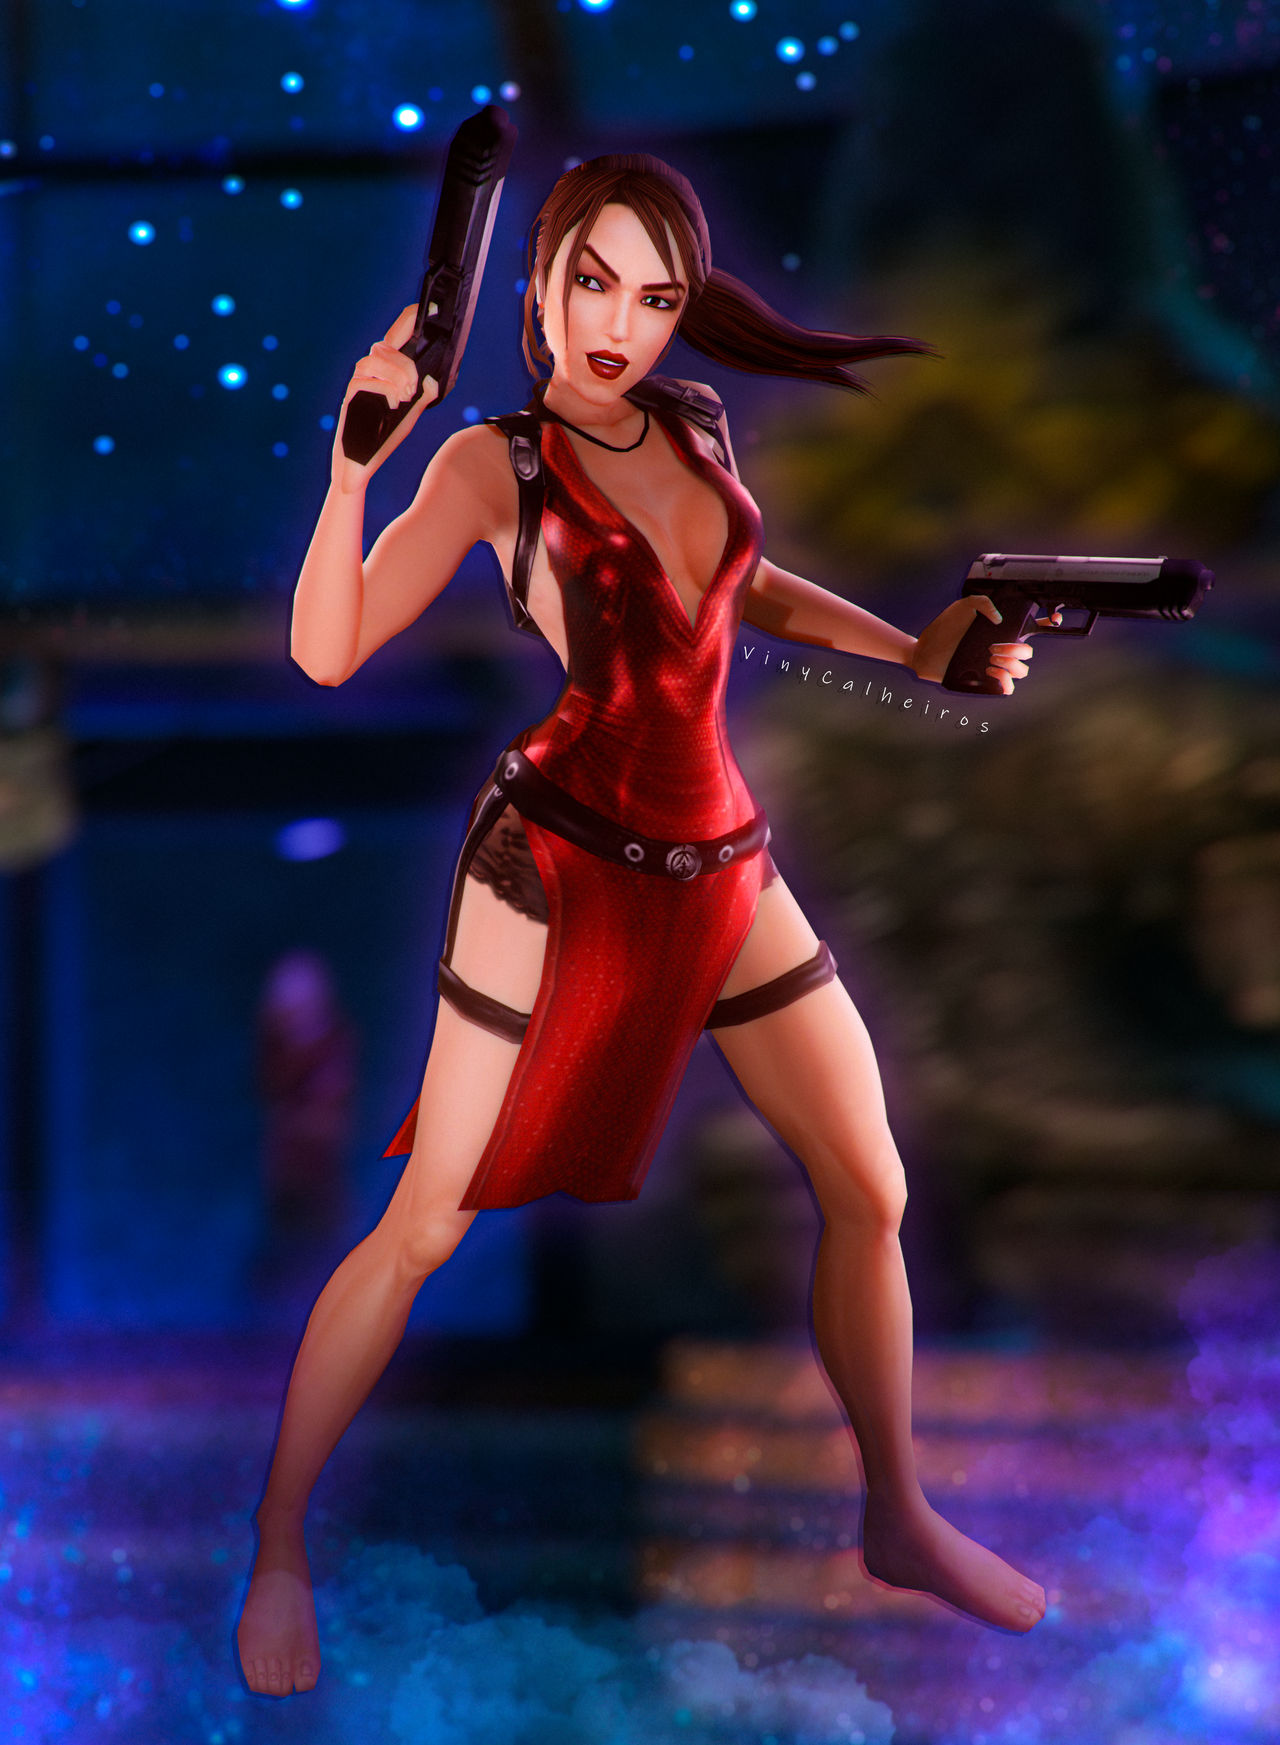 Code Veronica Chris Front Render by LitoPerezito on DeviantArt